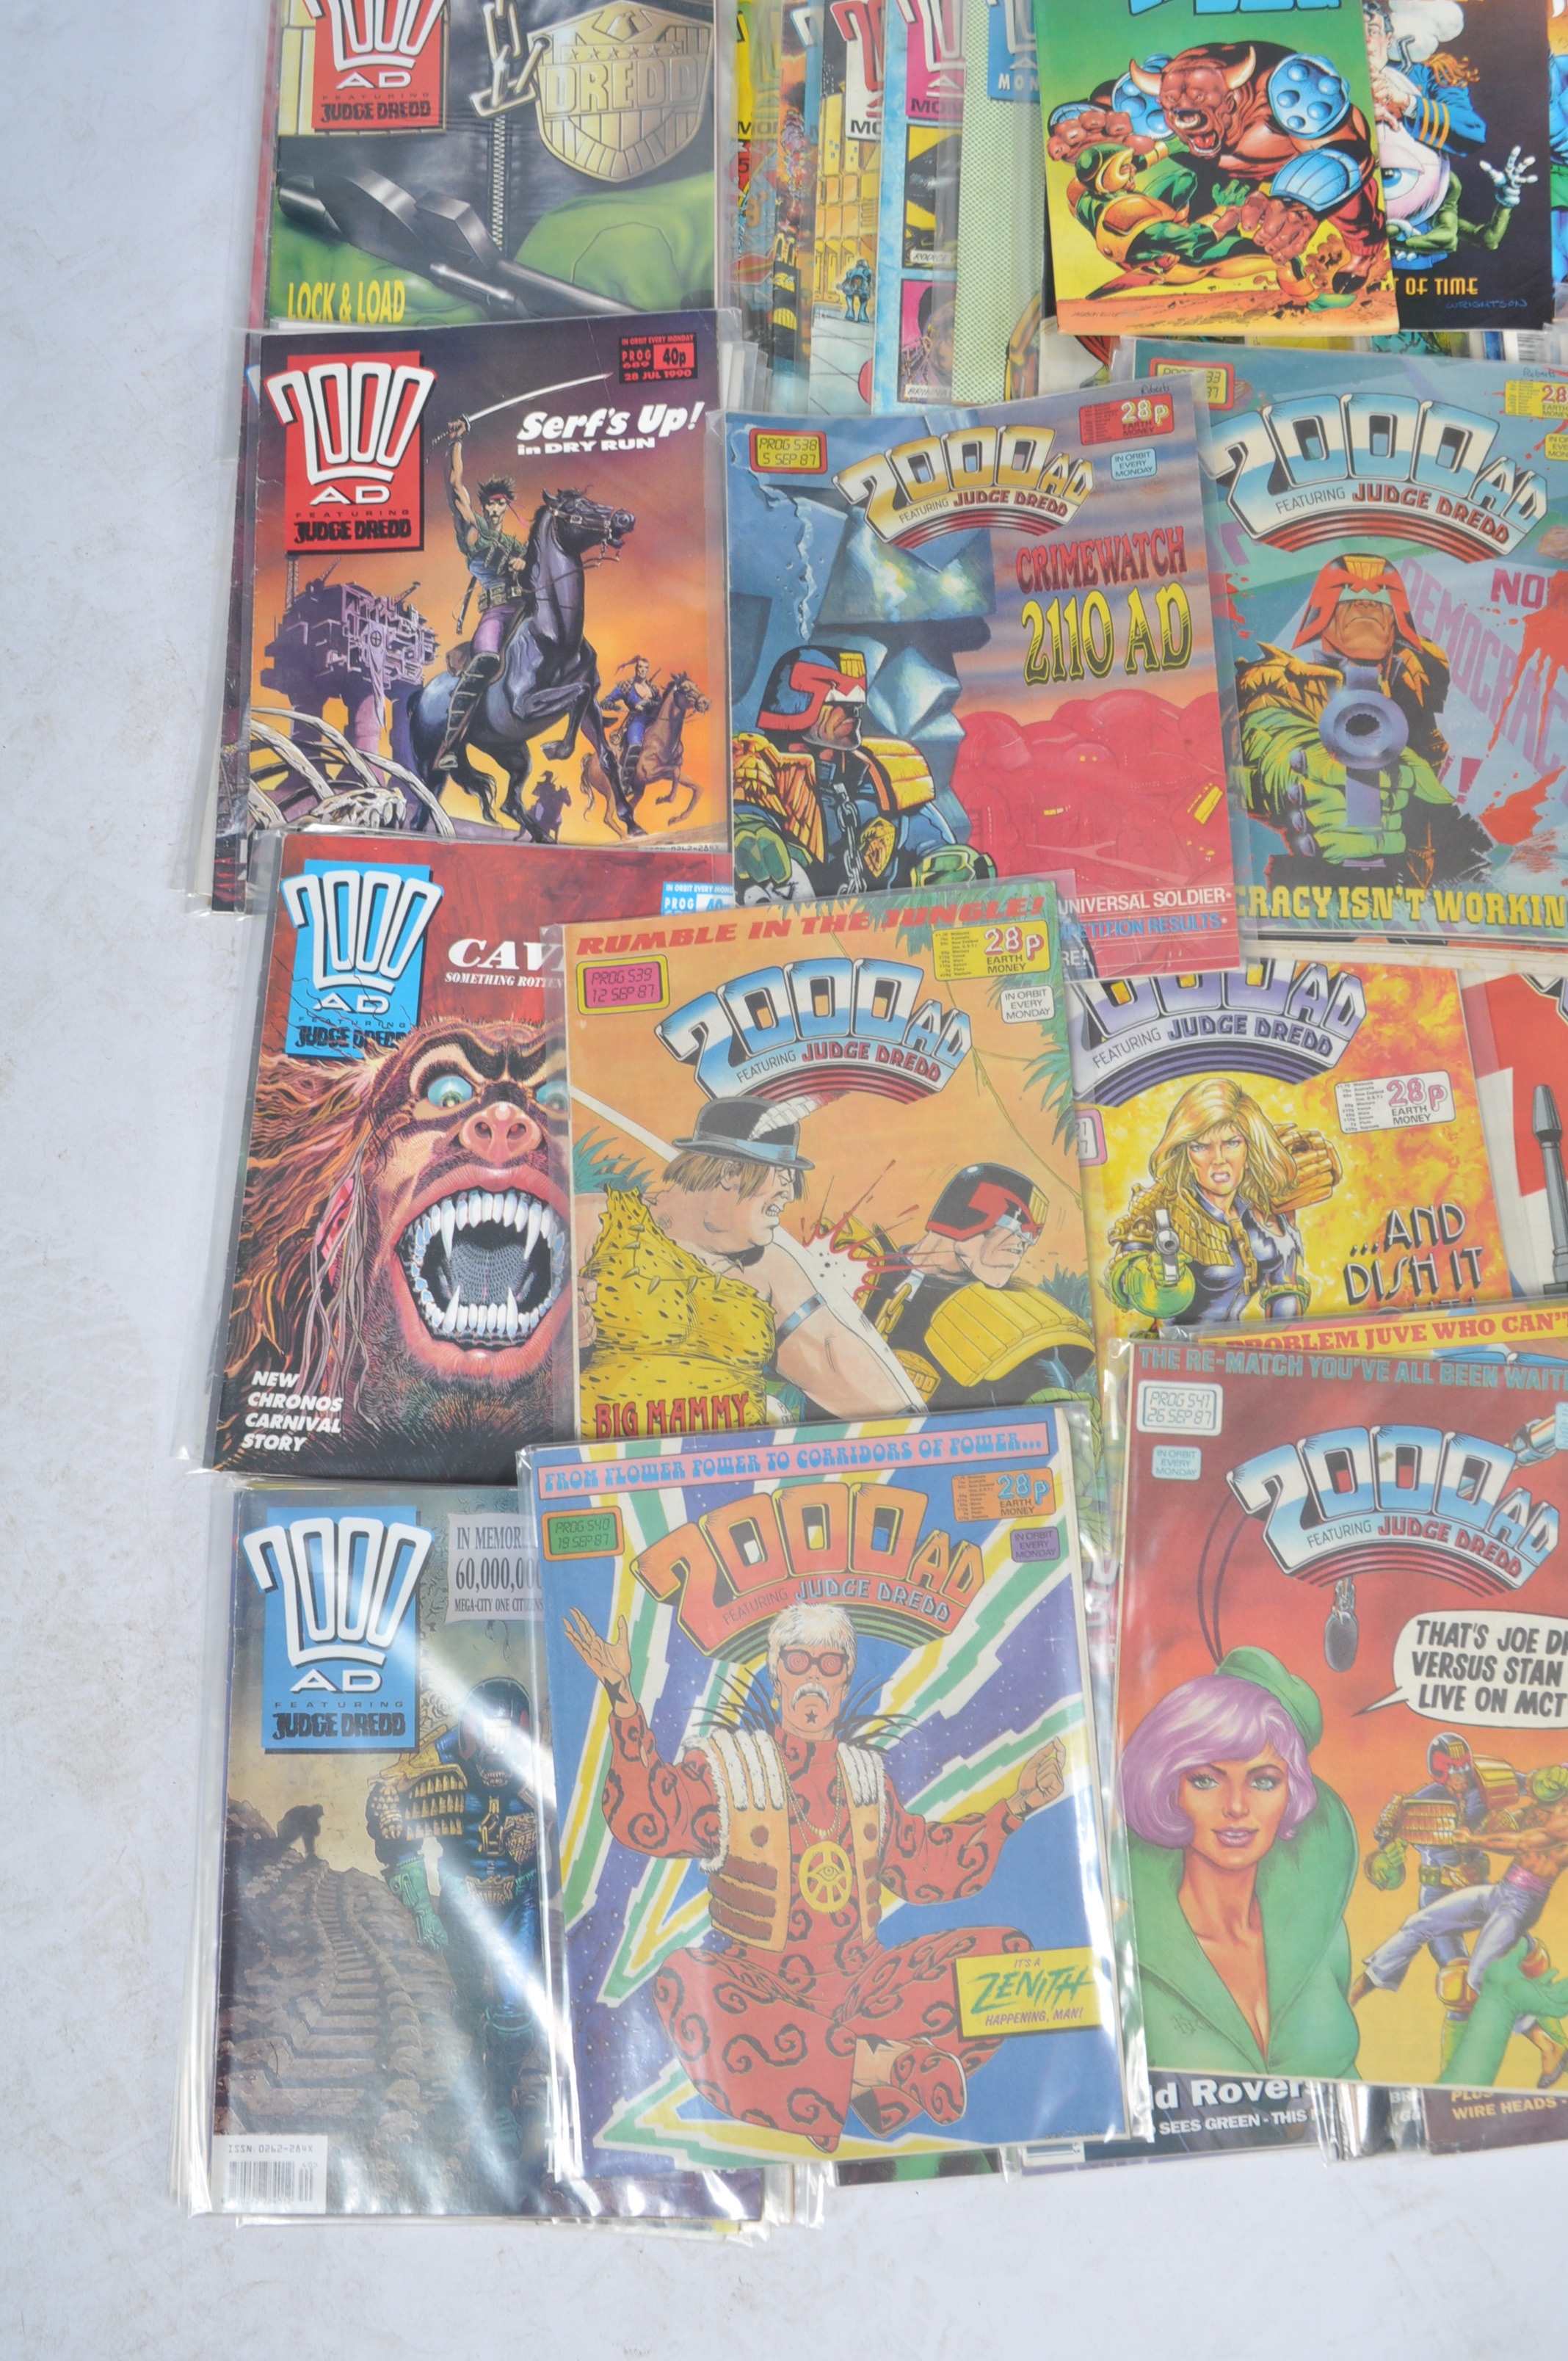 COMIC BOOKS - 2000AD - LARGE COLLECTION OF VINTAGE COMIC BOOKS - Image 7 of 17